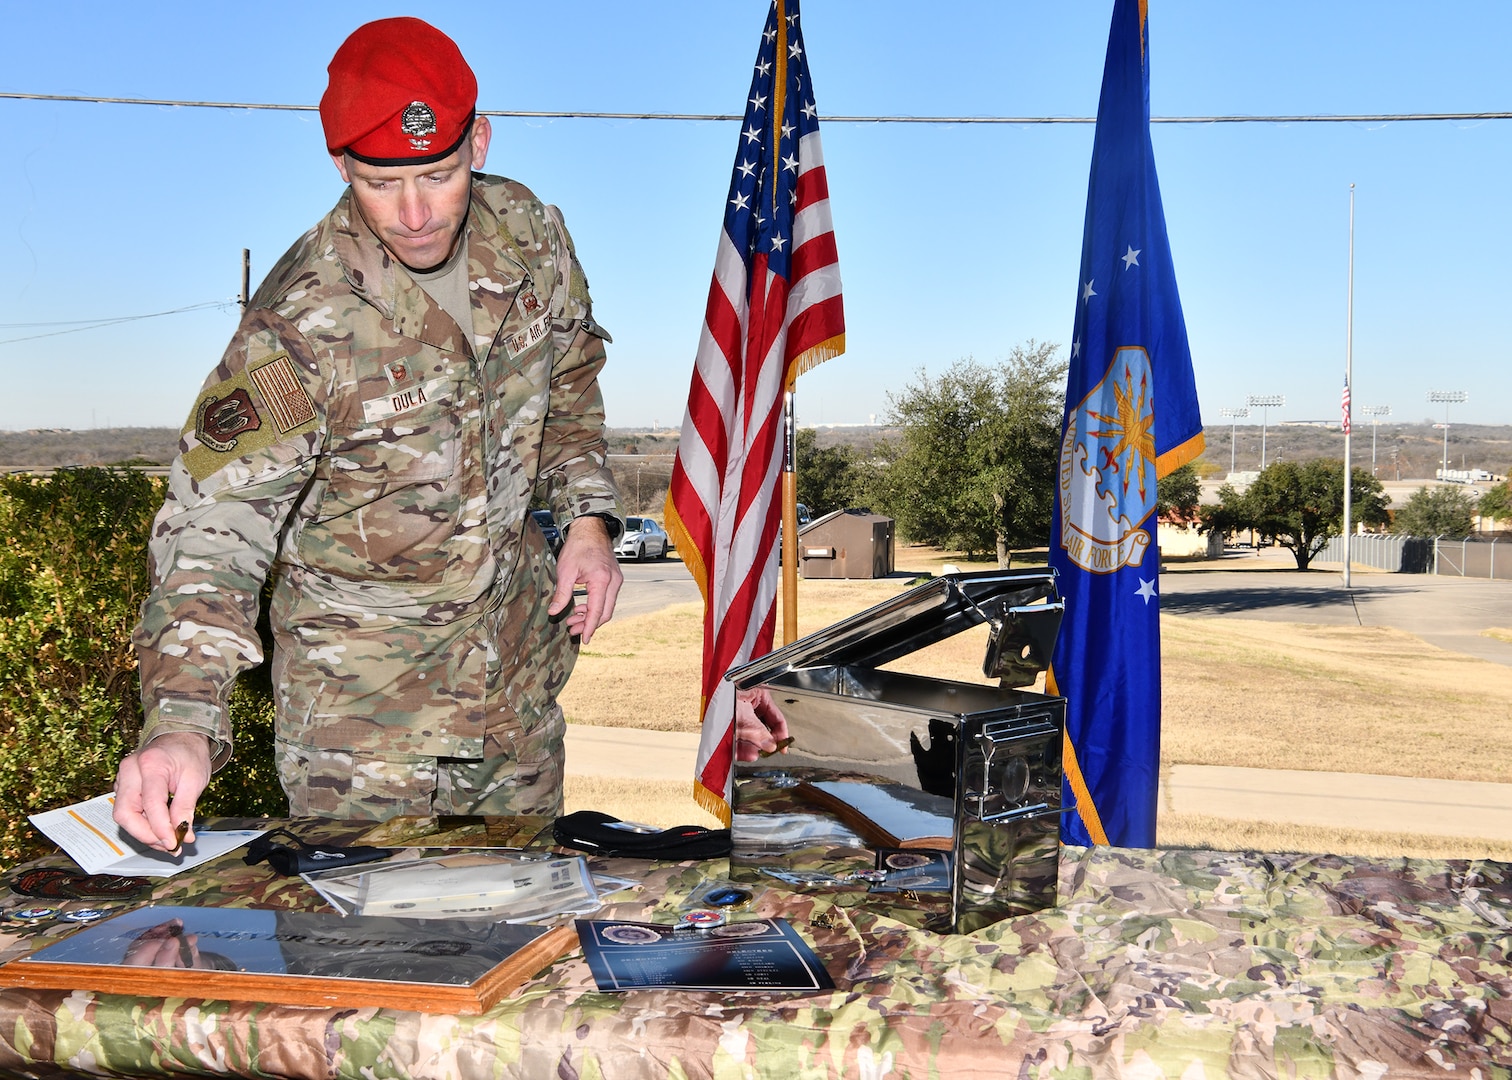 U.S. Air Force Col. Mason R. Dula, Special Warfare Training Wing commander, places a spent bullet shell prior to putting it into the SWTW aquatics training center heritage capsule while standing next to the future site of the SWTW aquatics training facility